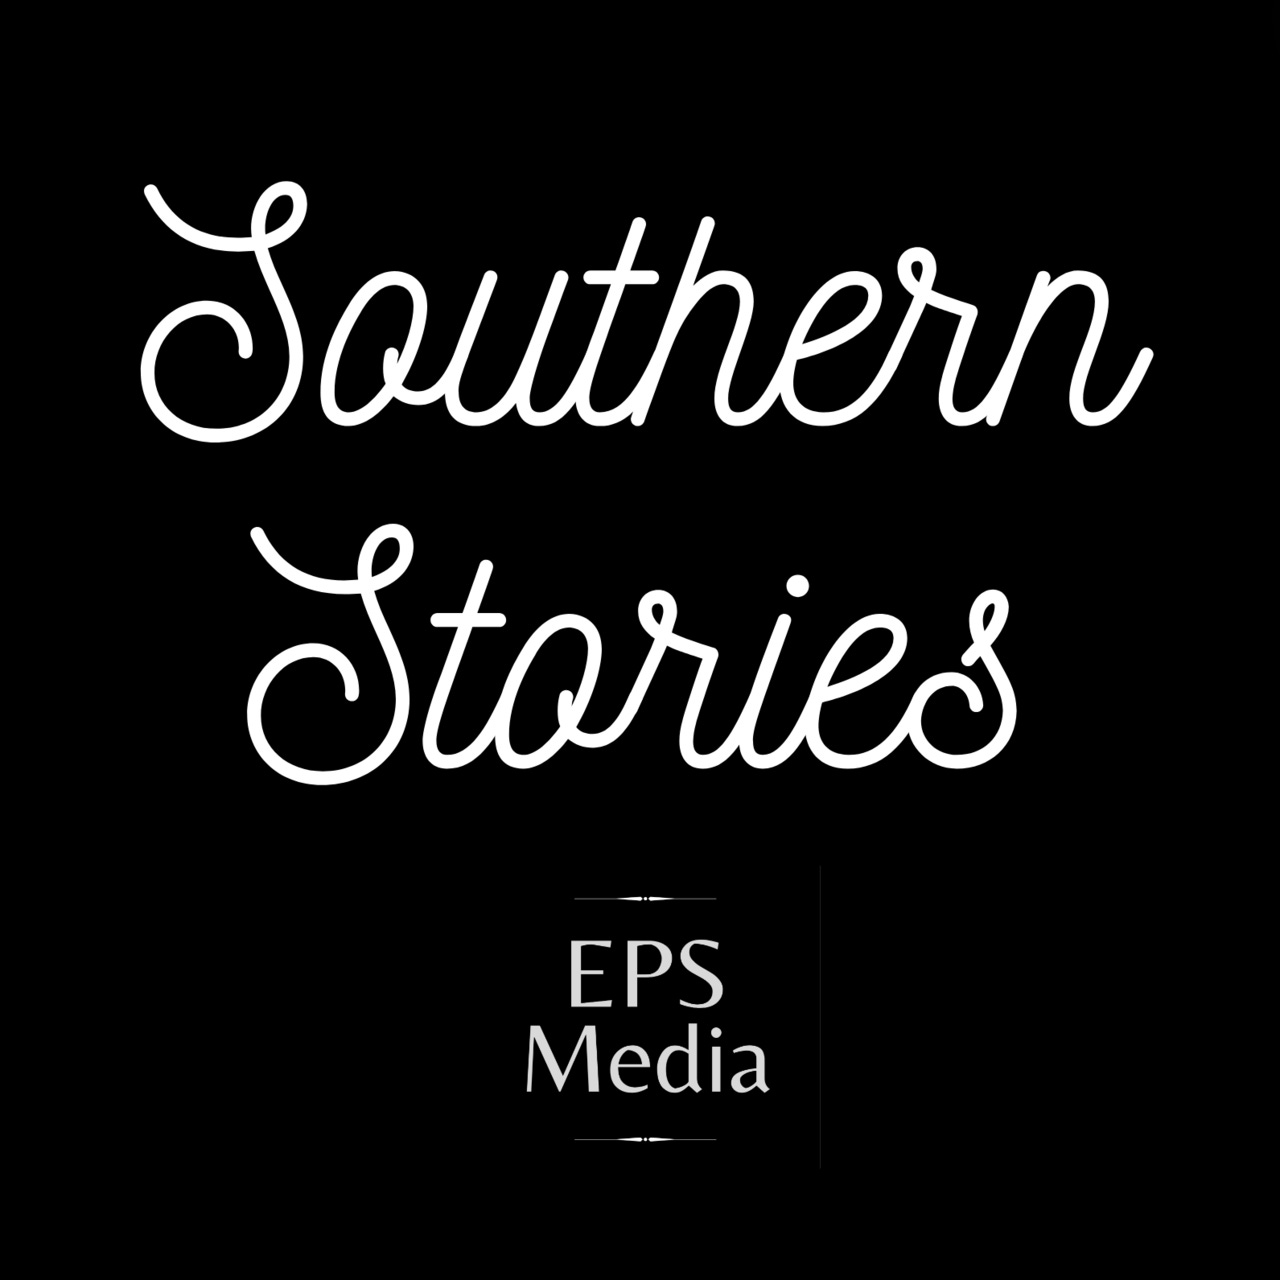 Artwork for Southern Stories by EPS Media